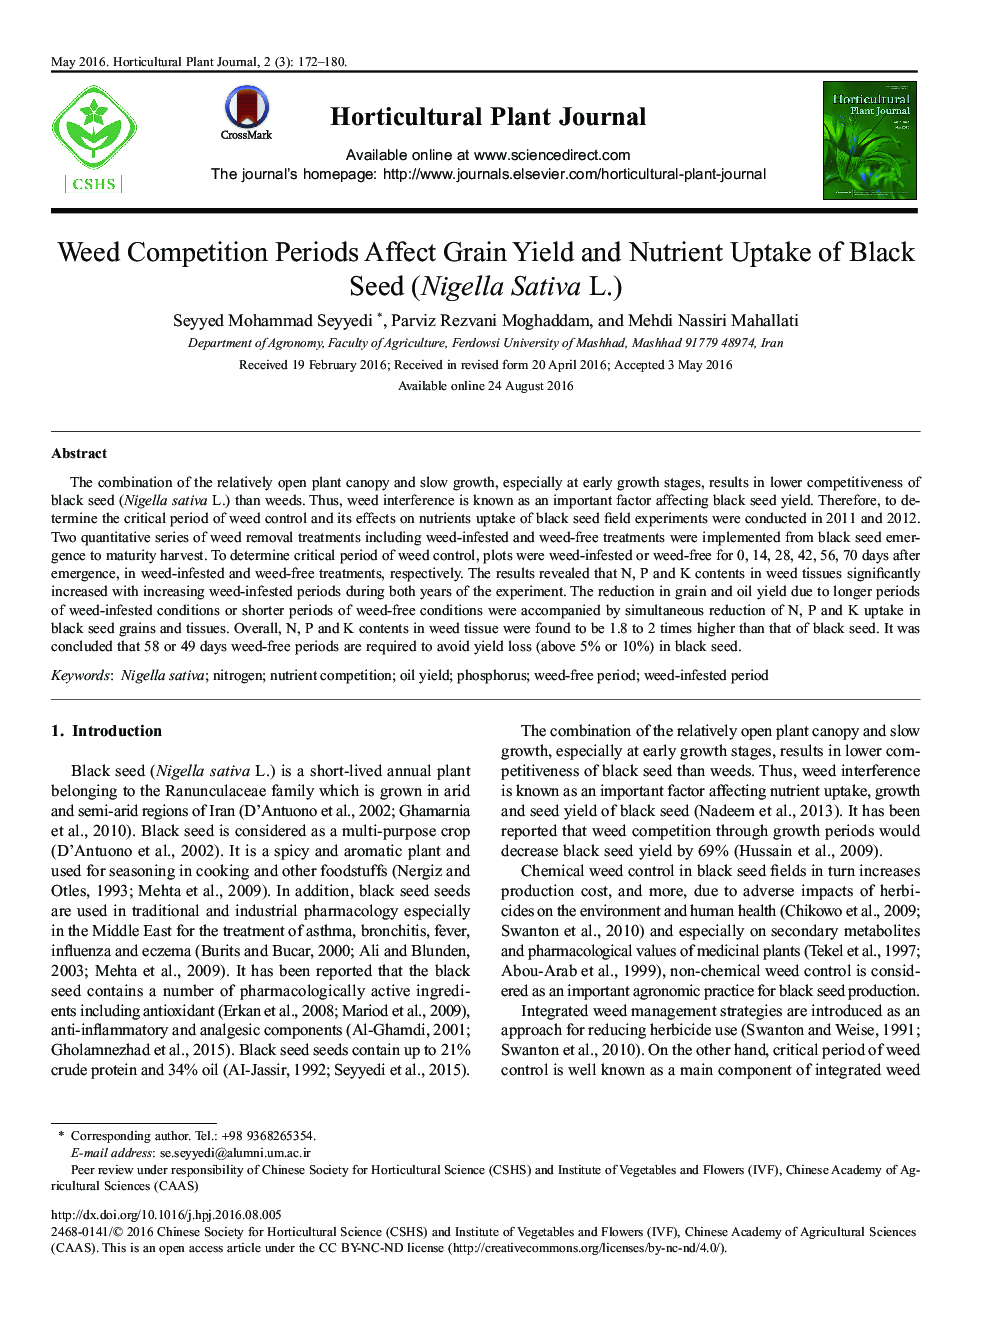 Weed Competition Periods Affect Grain Yield and Nutrient Uptake of Black Seed (Nigella Sativa L.) 